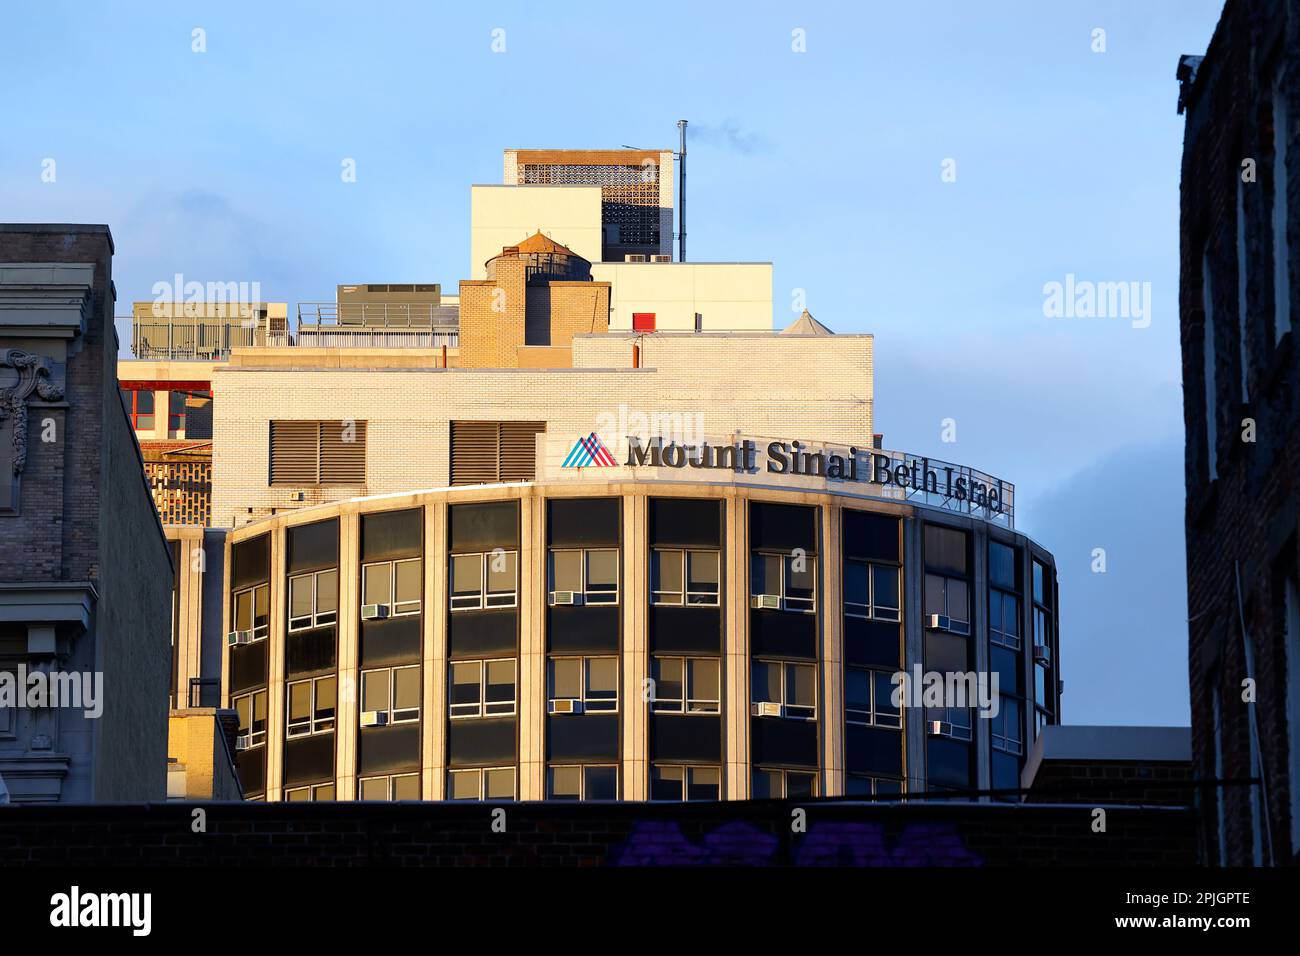 Mount Sinai Beth Israel hospital framed by adjacent buildings. At 281 First Ave, New York. Stock Photo